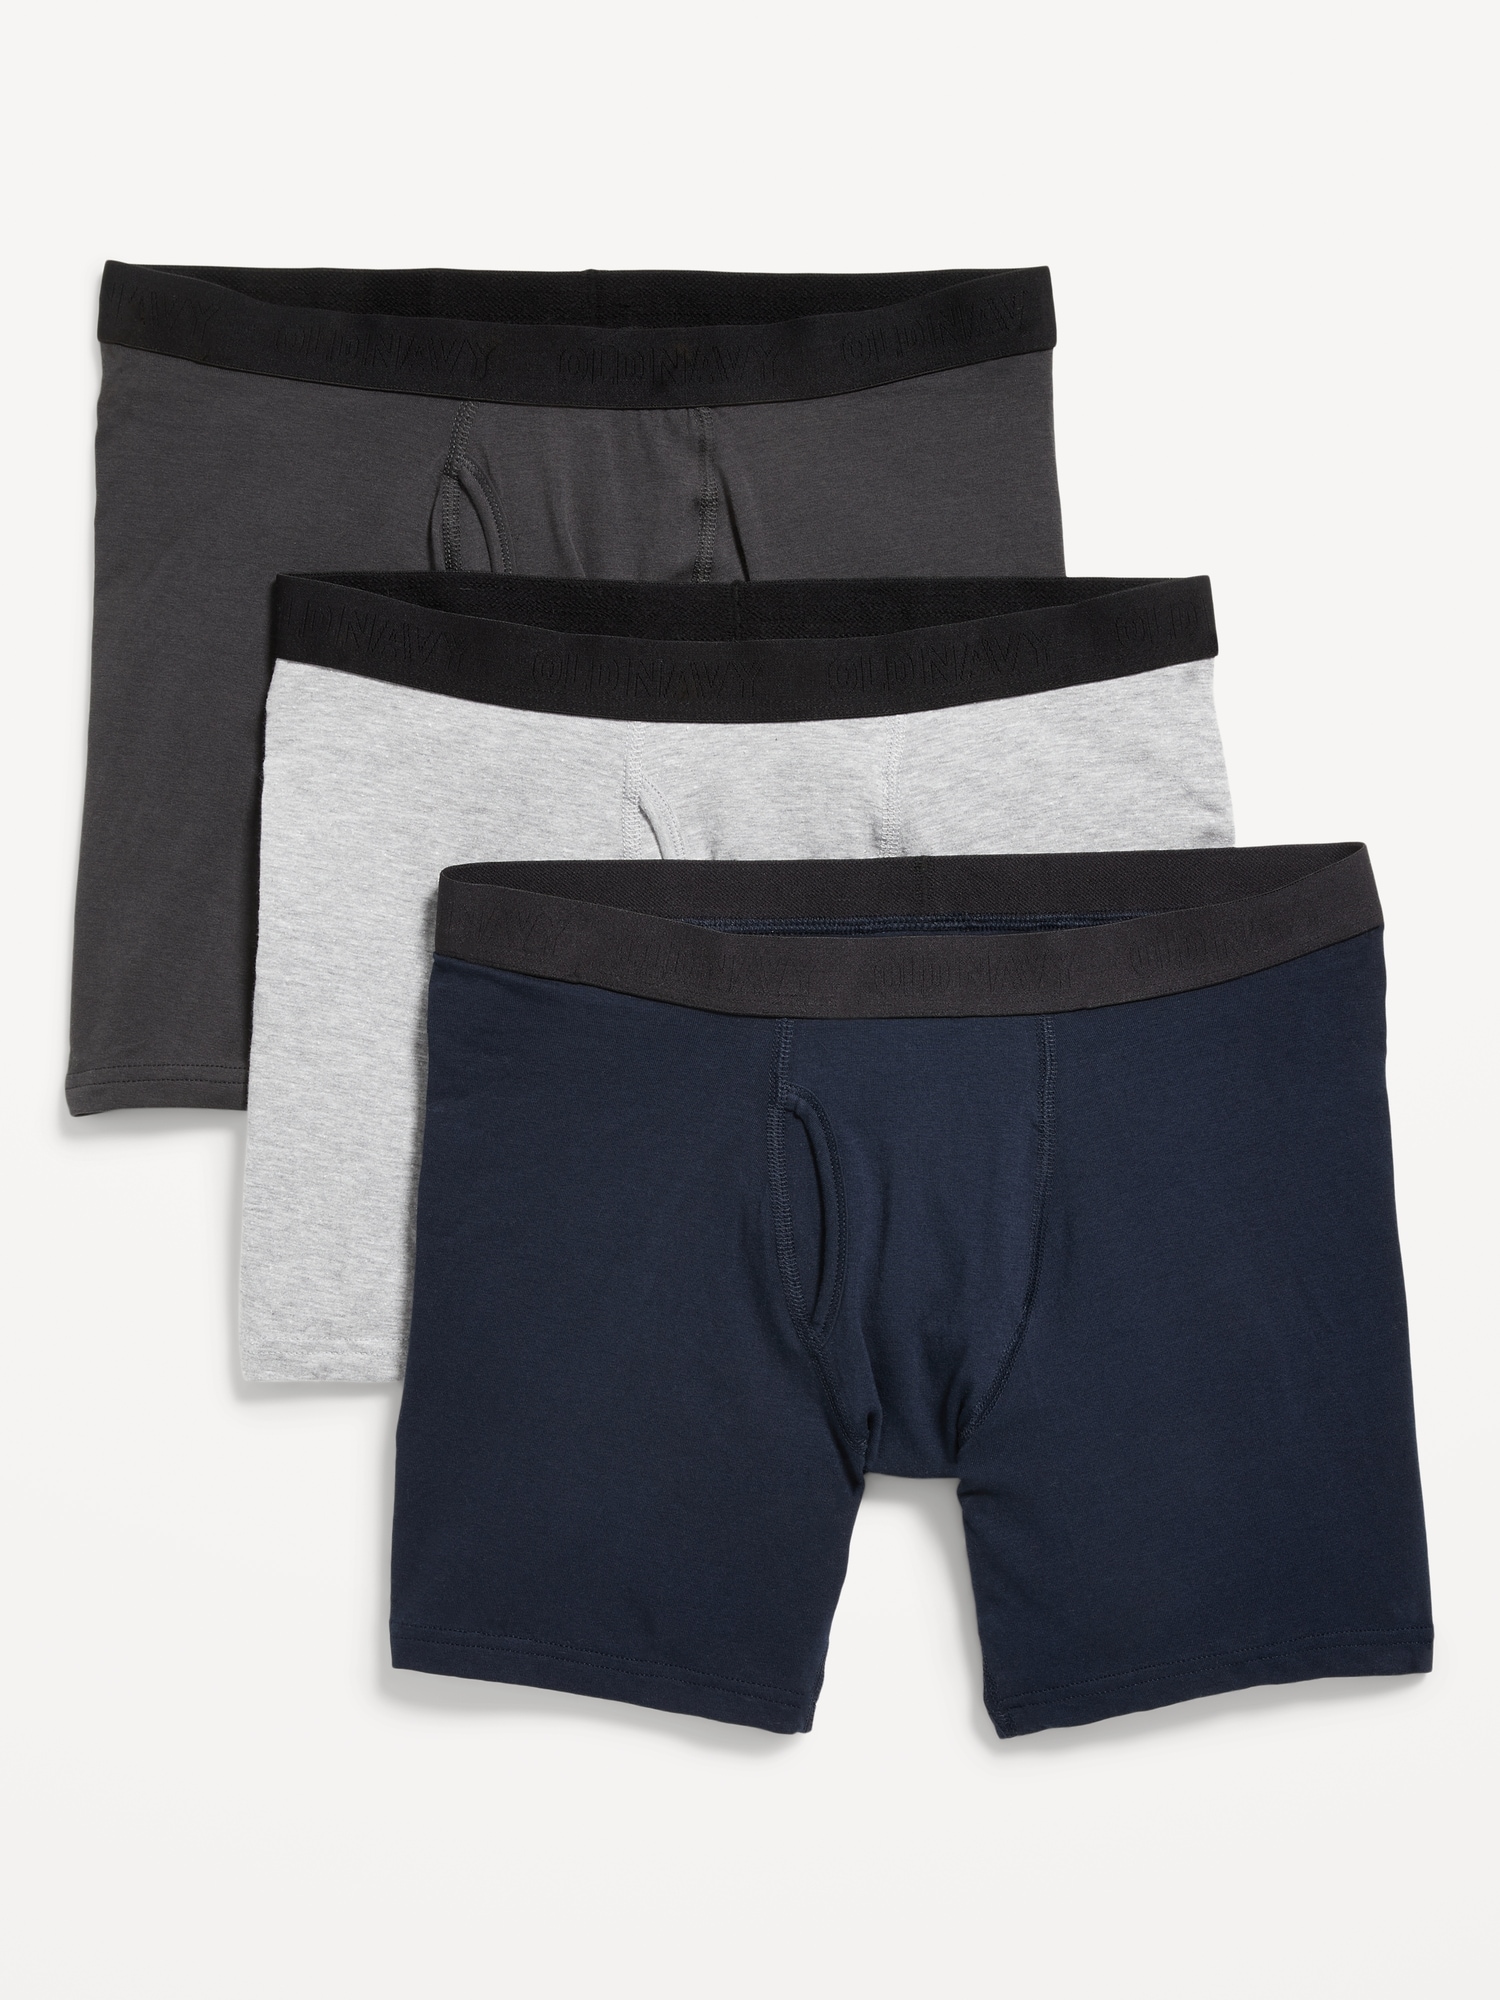 Old Navy Boys Underwear 3 Pack Boxer Brief Solid Black Gray White Size S or  M